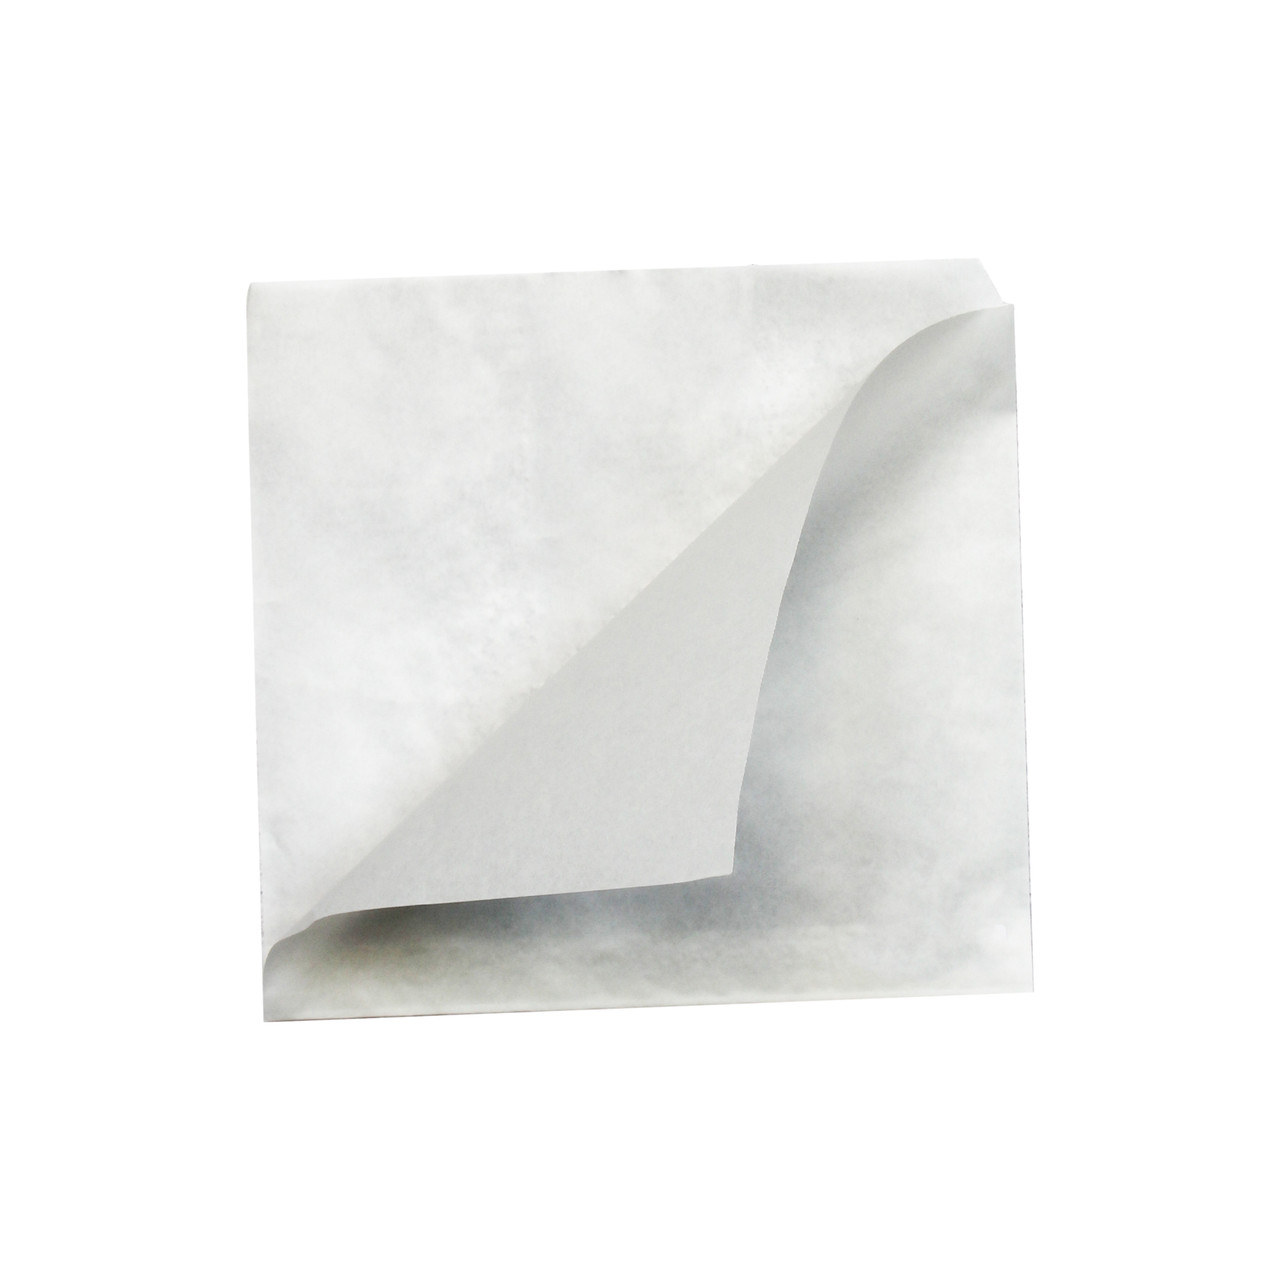 White Kraft Bag Opens 2 Sides Greaseproof 9.4 x 9.4in